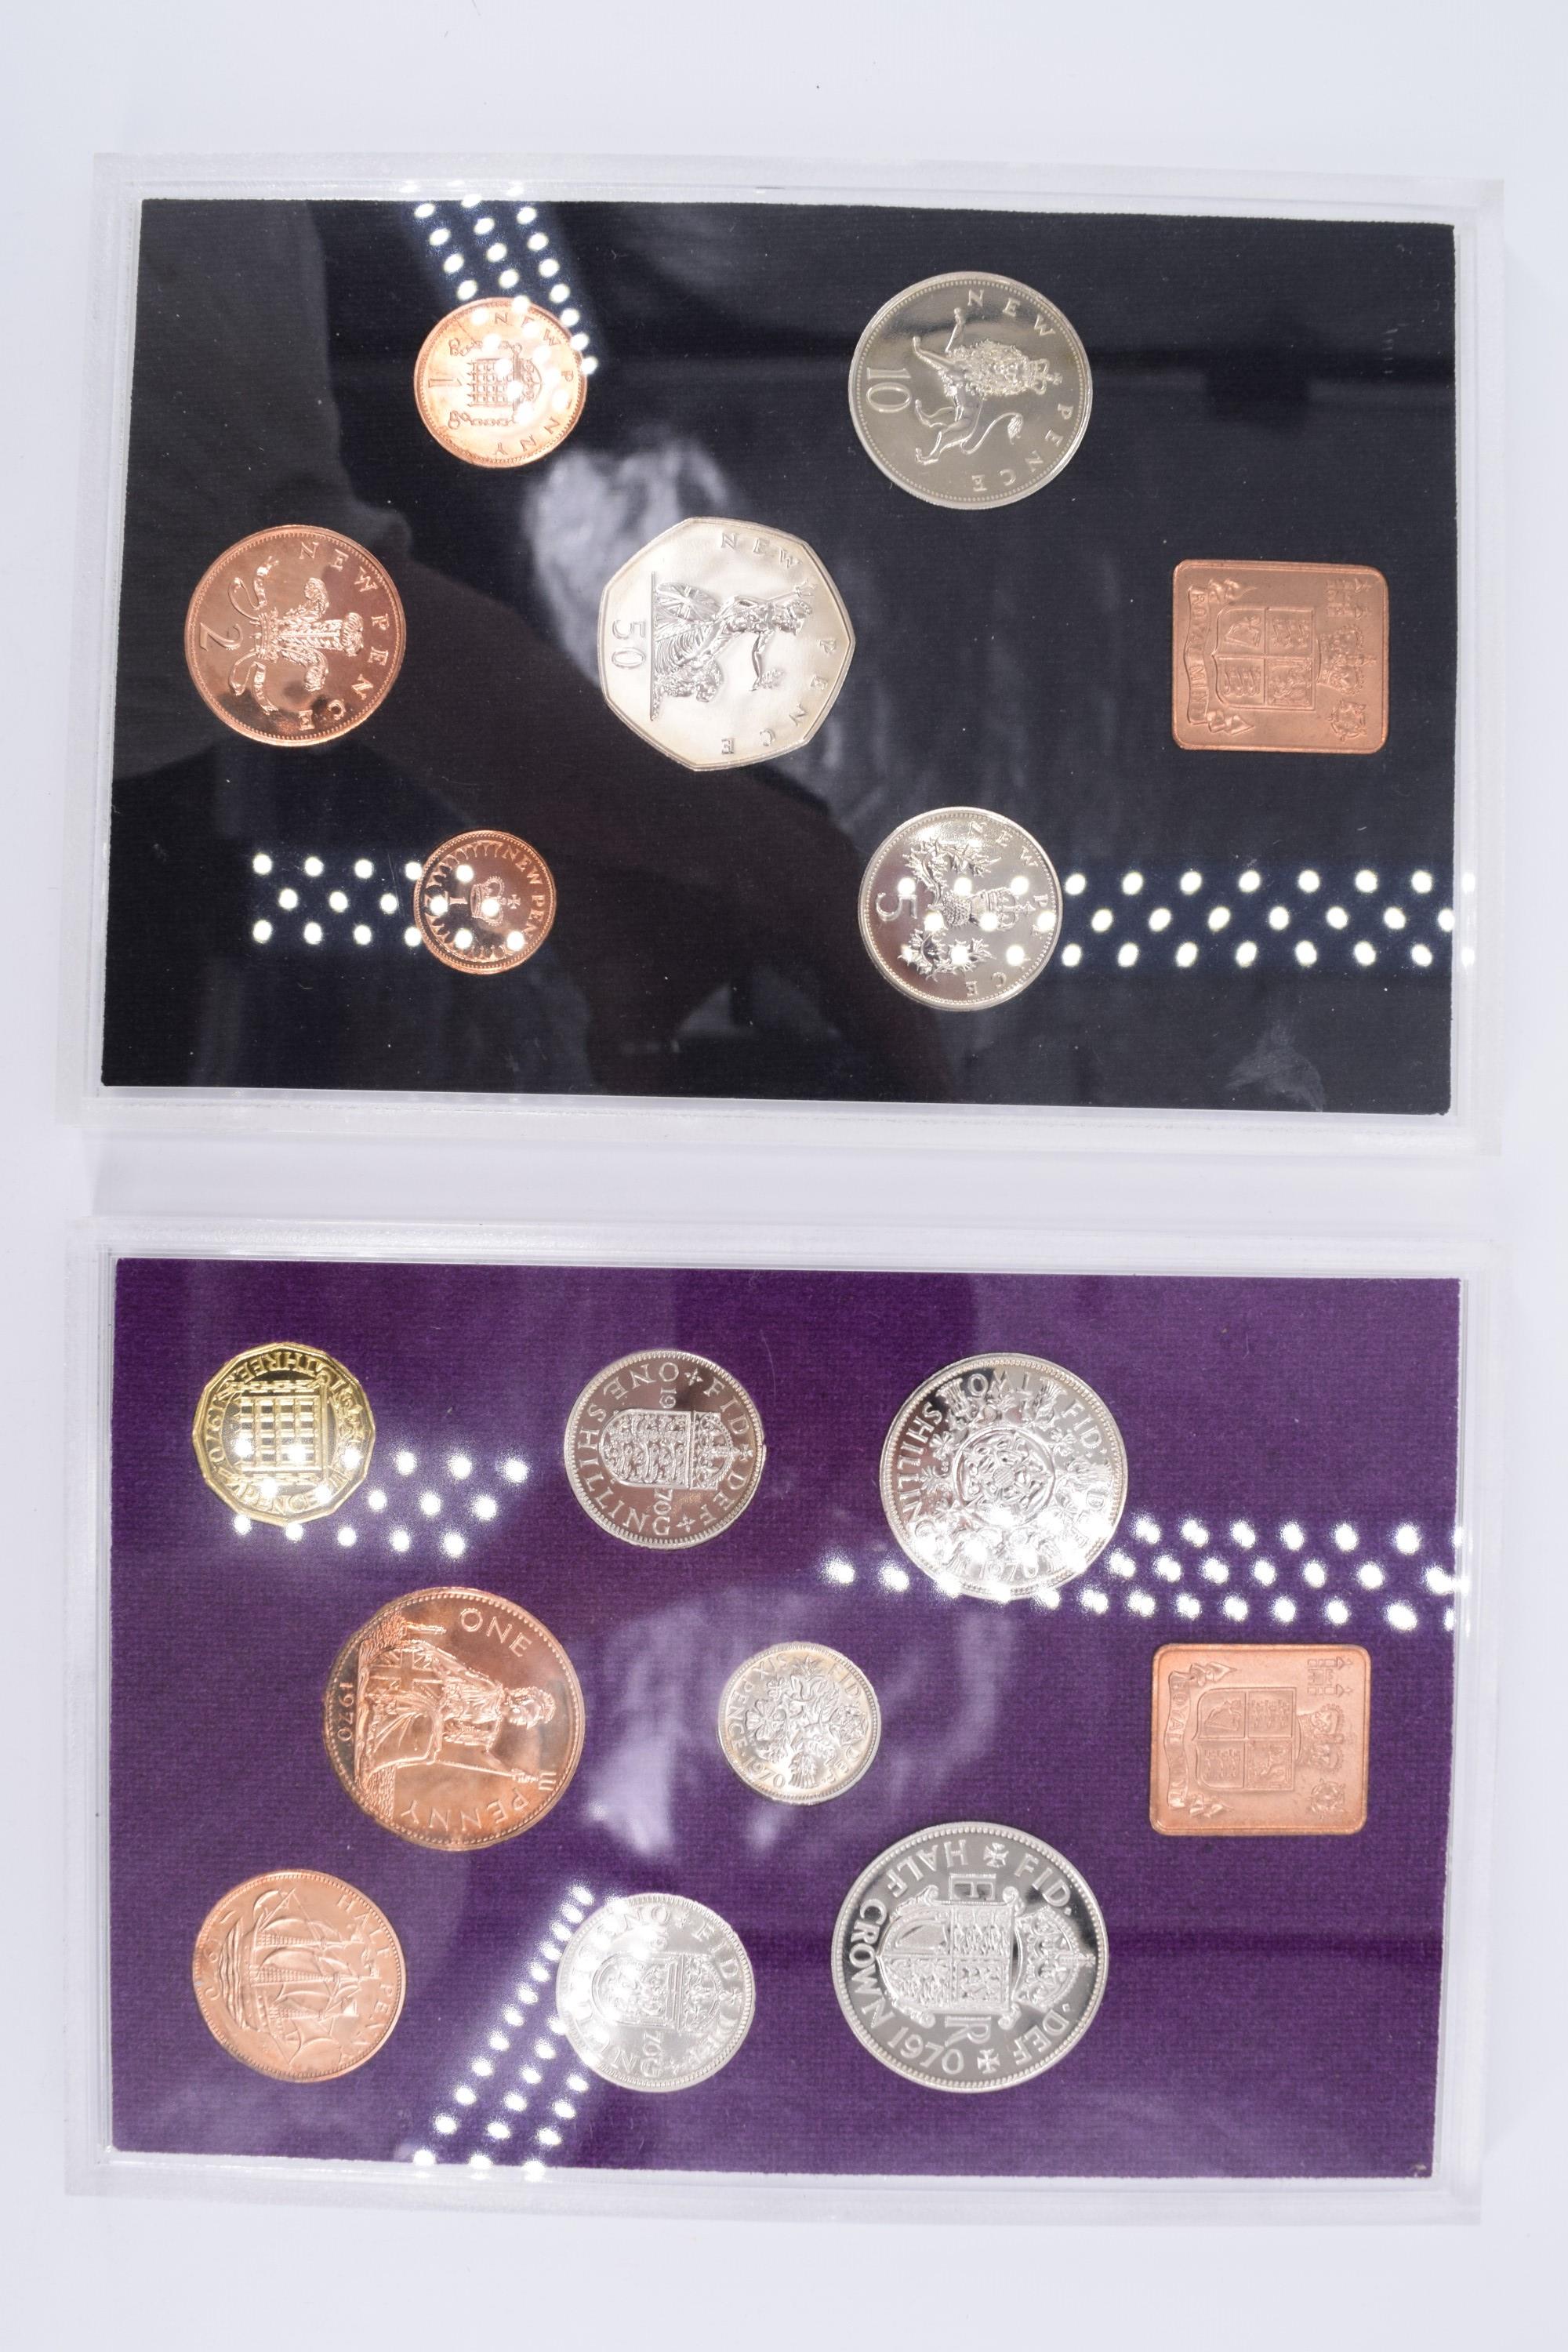 A group of GB and commemorative coins and coin sets, including "1970 Coinage of Great Britain and - Image 2 of 2